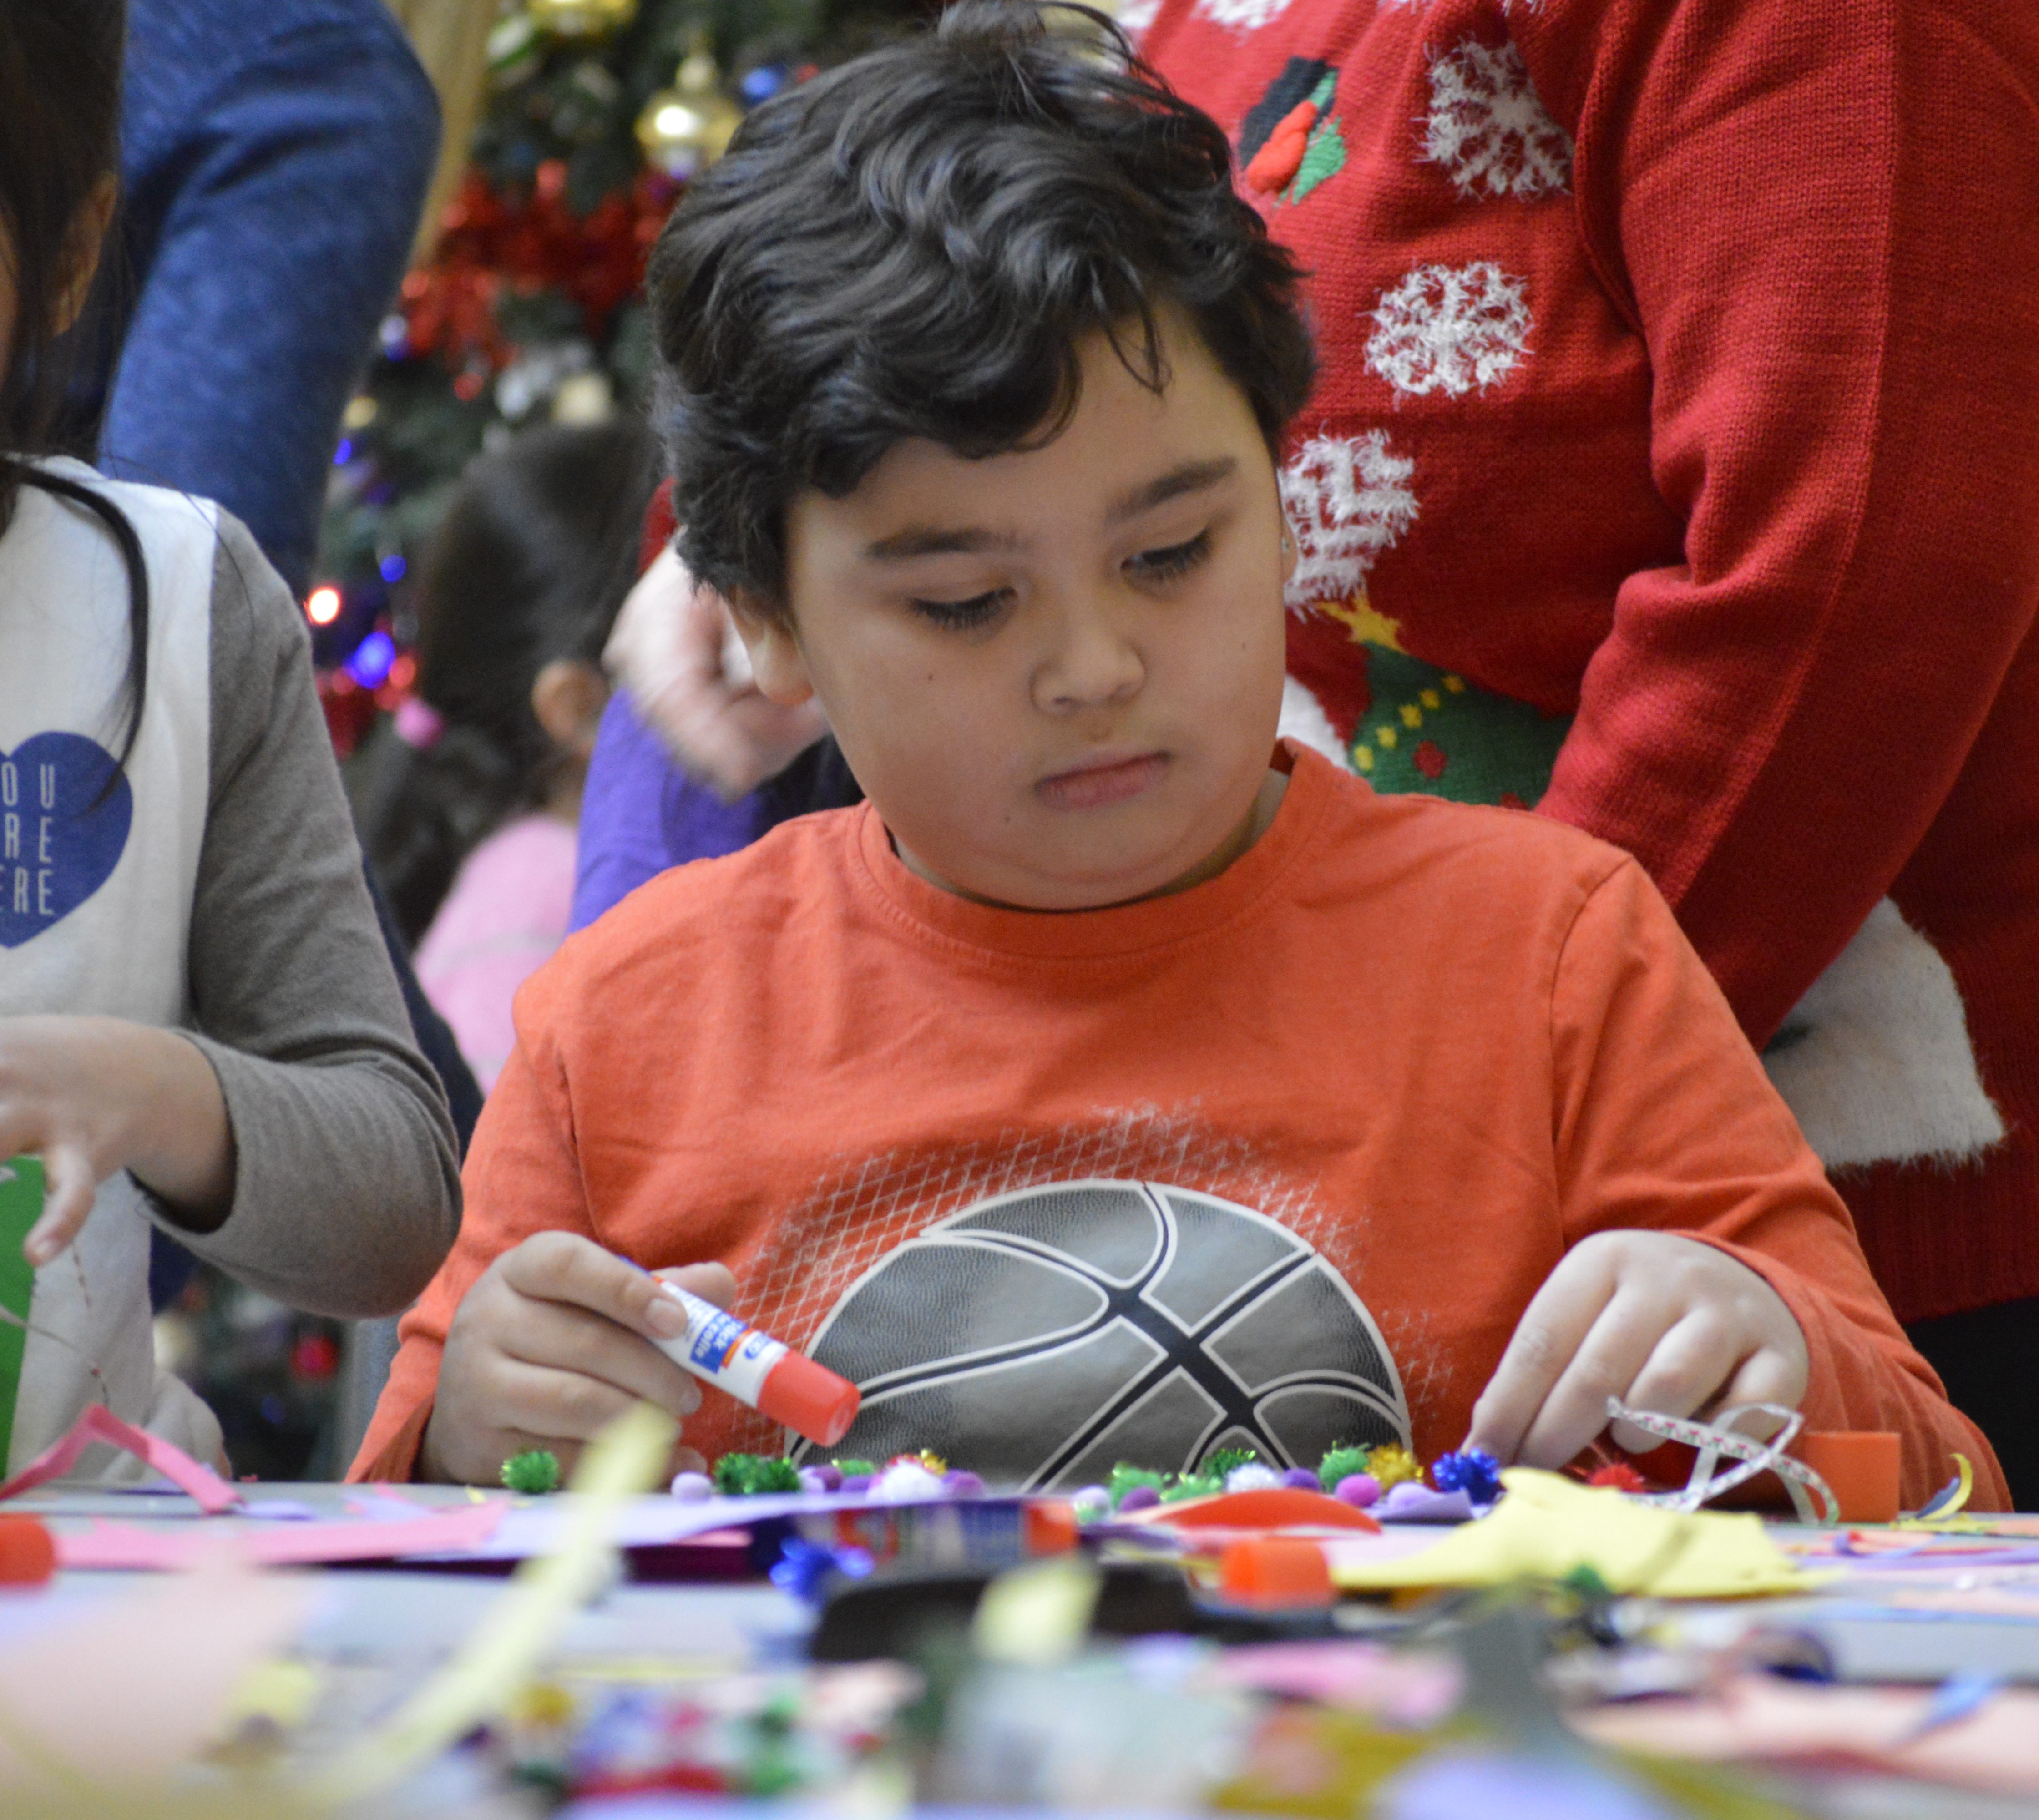 FIRST CHRISTMAS - Grade 4 student Chris Galan Hernandez crafts at St. Patrick’s Community School last Wednesday. Hernandez came to Canada from El Salvador. For students like him who are new to the country